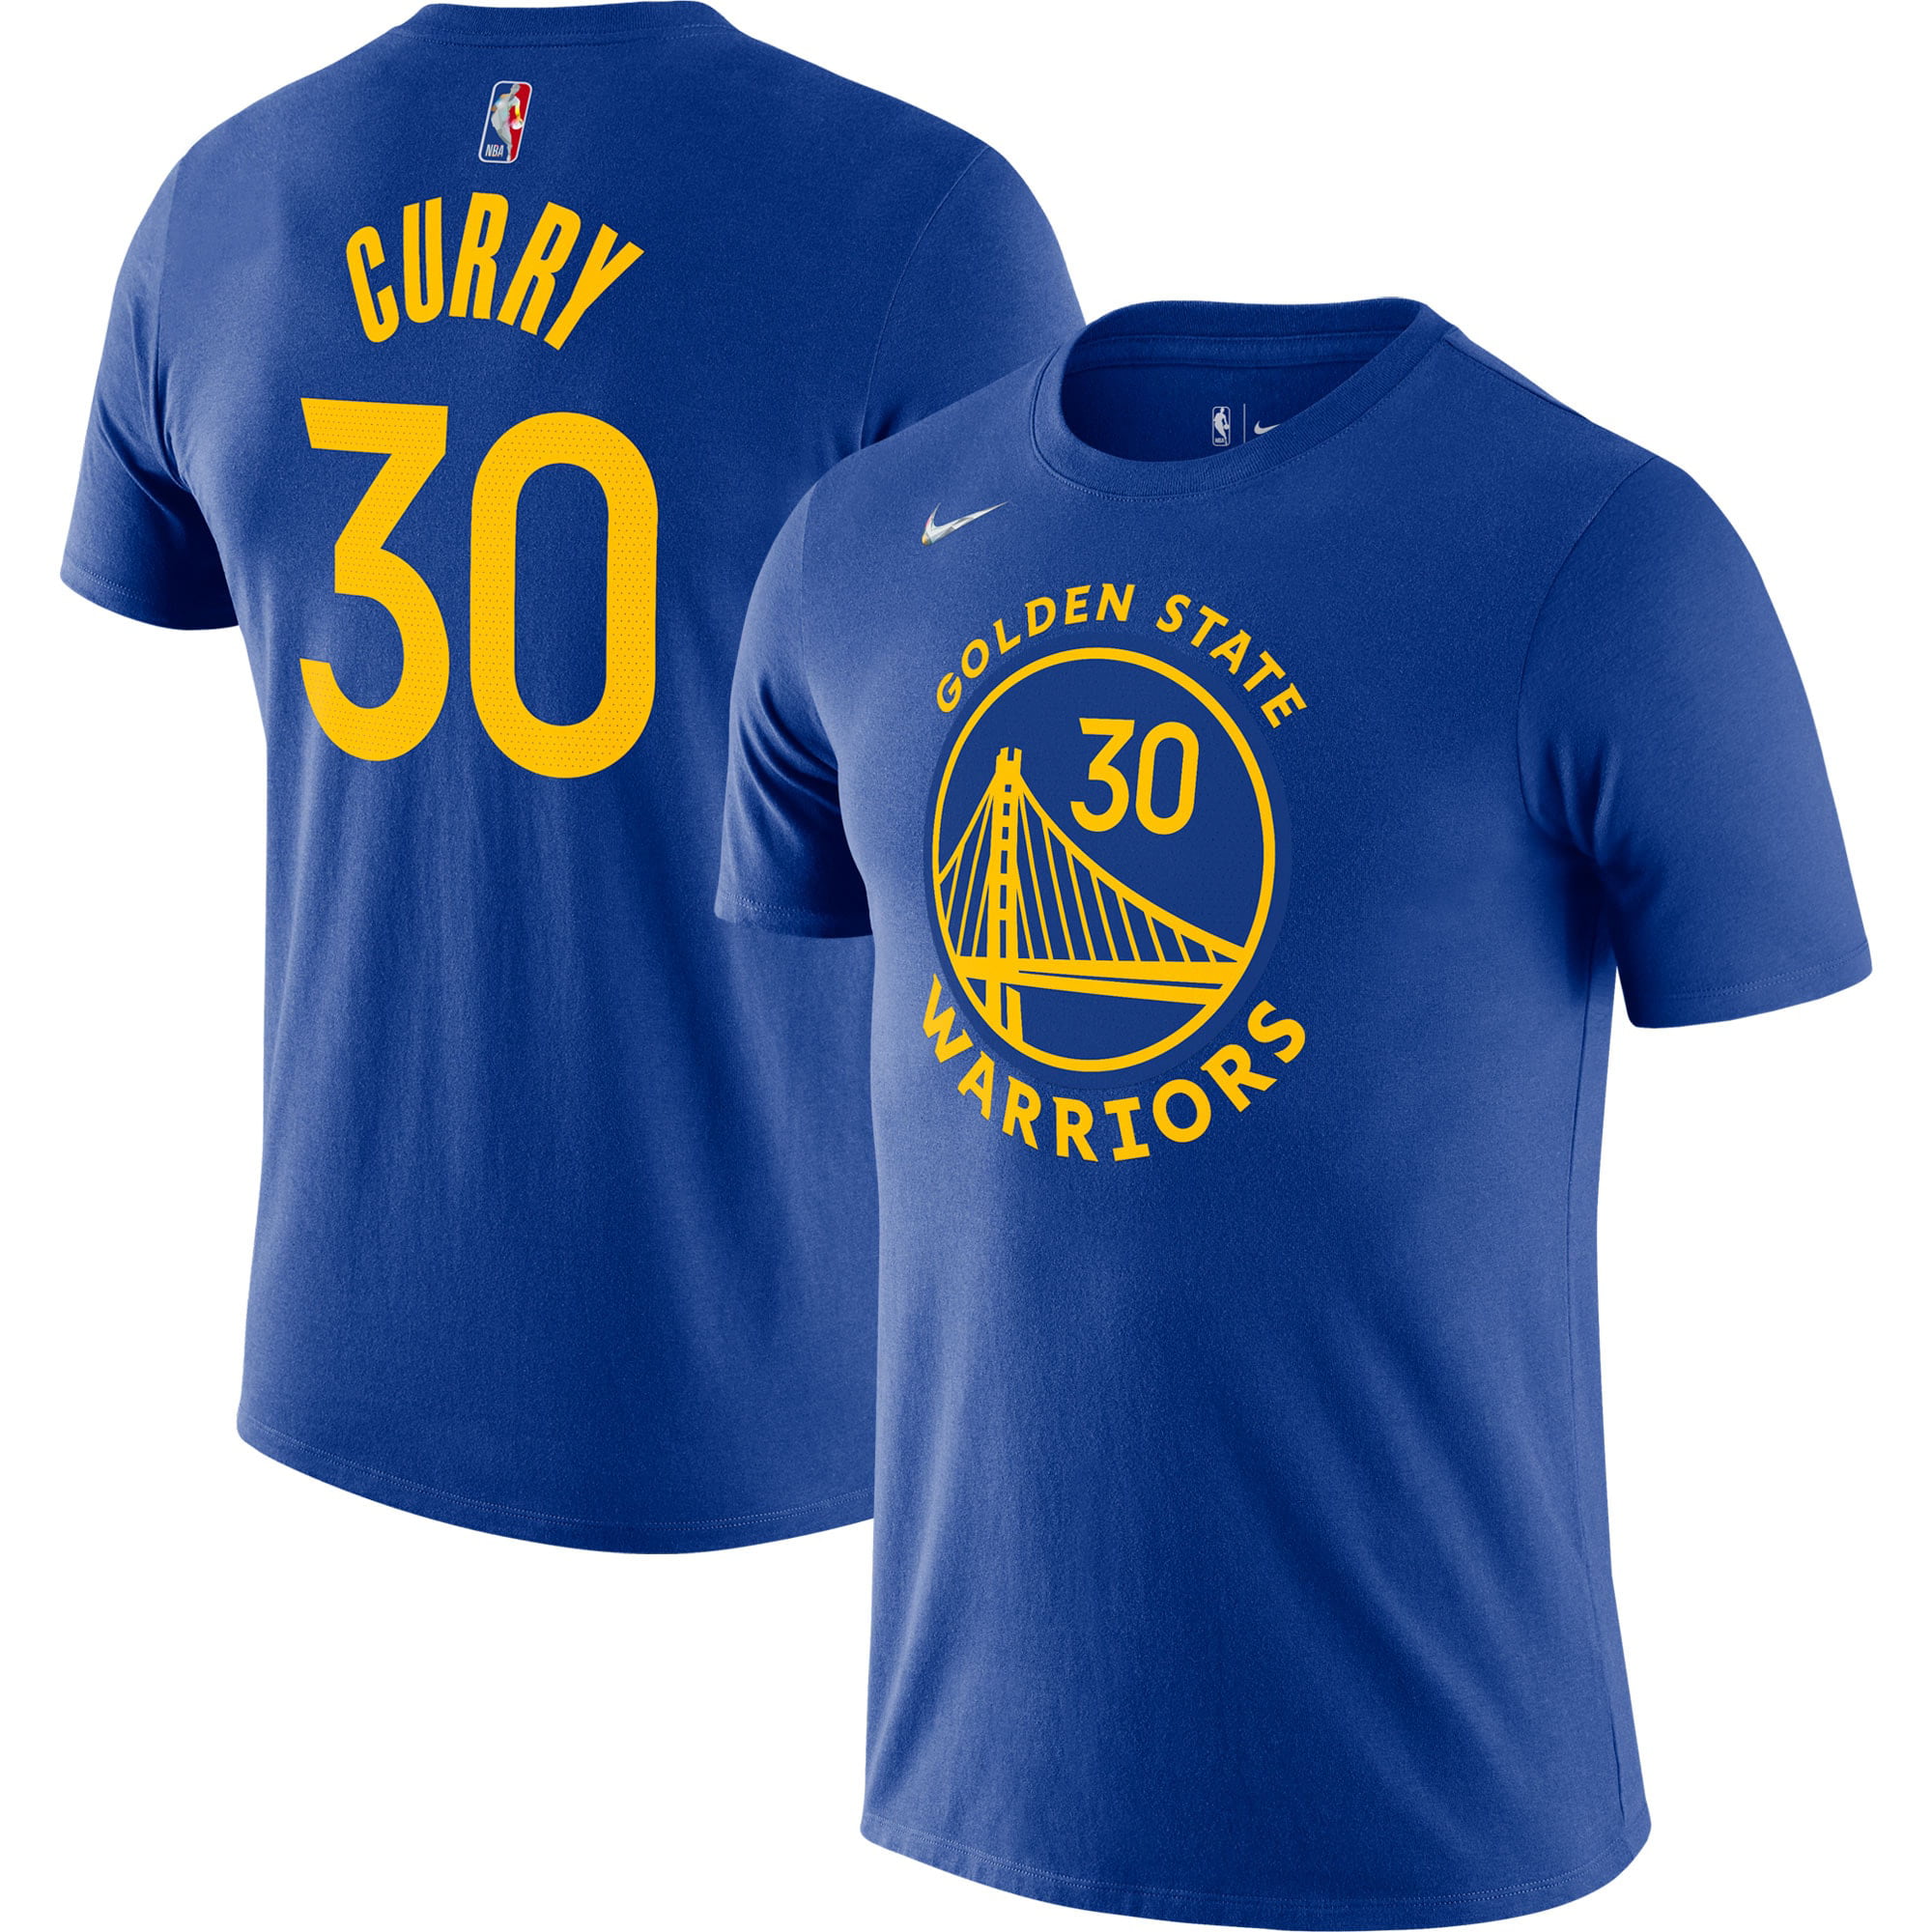 Golden State Warriors The City Stephen Curry t-shirt MVP graphic tee s-xL 